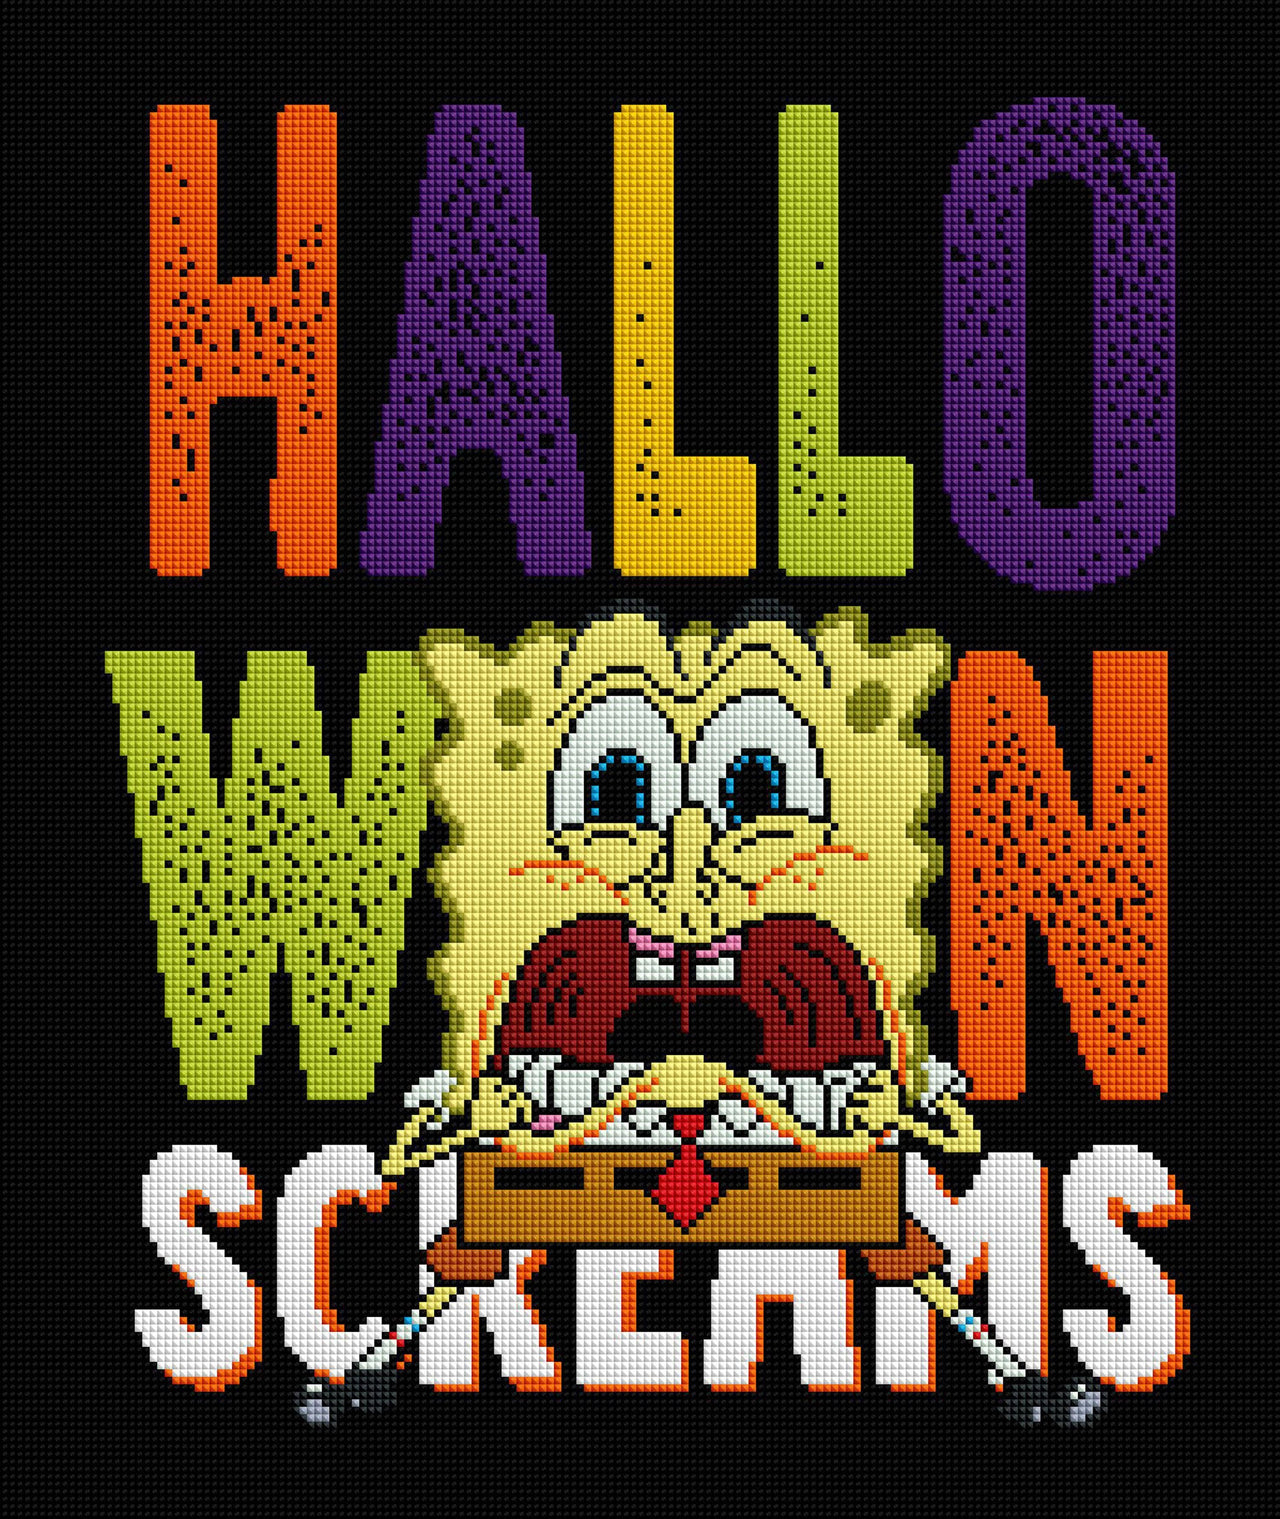 Diamond Painting Halloween Screams 17" x 20" (43cm x 51cm) / Square with 17 Colors including 3 ABs / 34,713